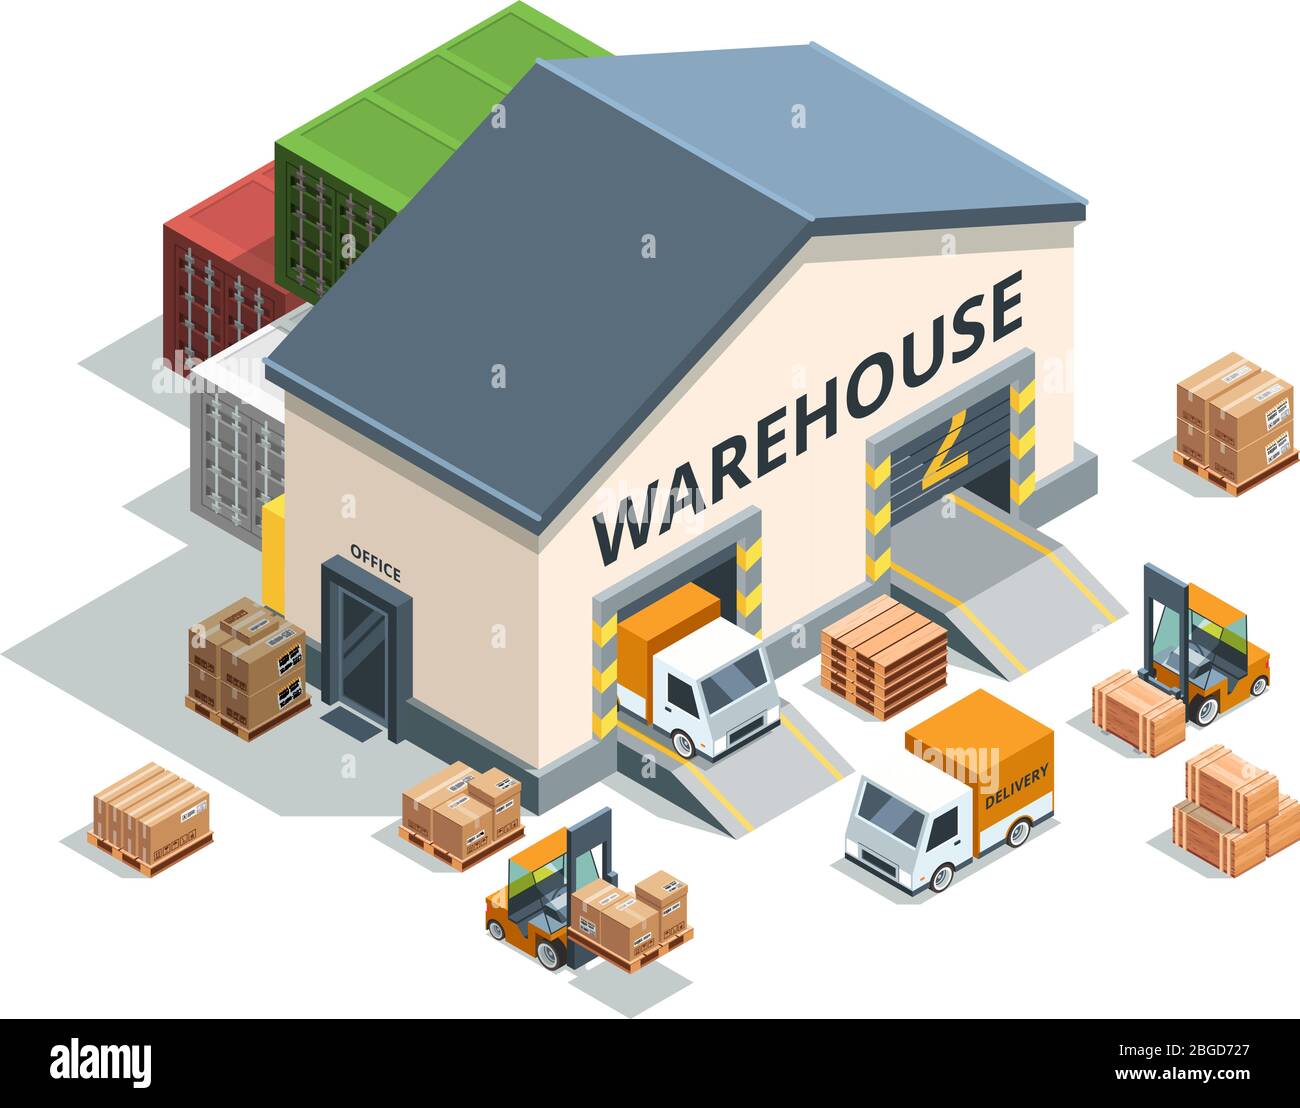 Warehouse building, trucks and load machines. Different pallets and boxes. Logistics vector illustrations Stock Vector